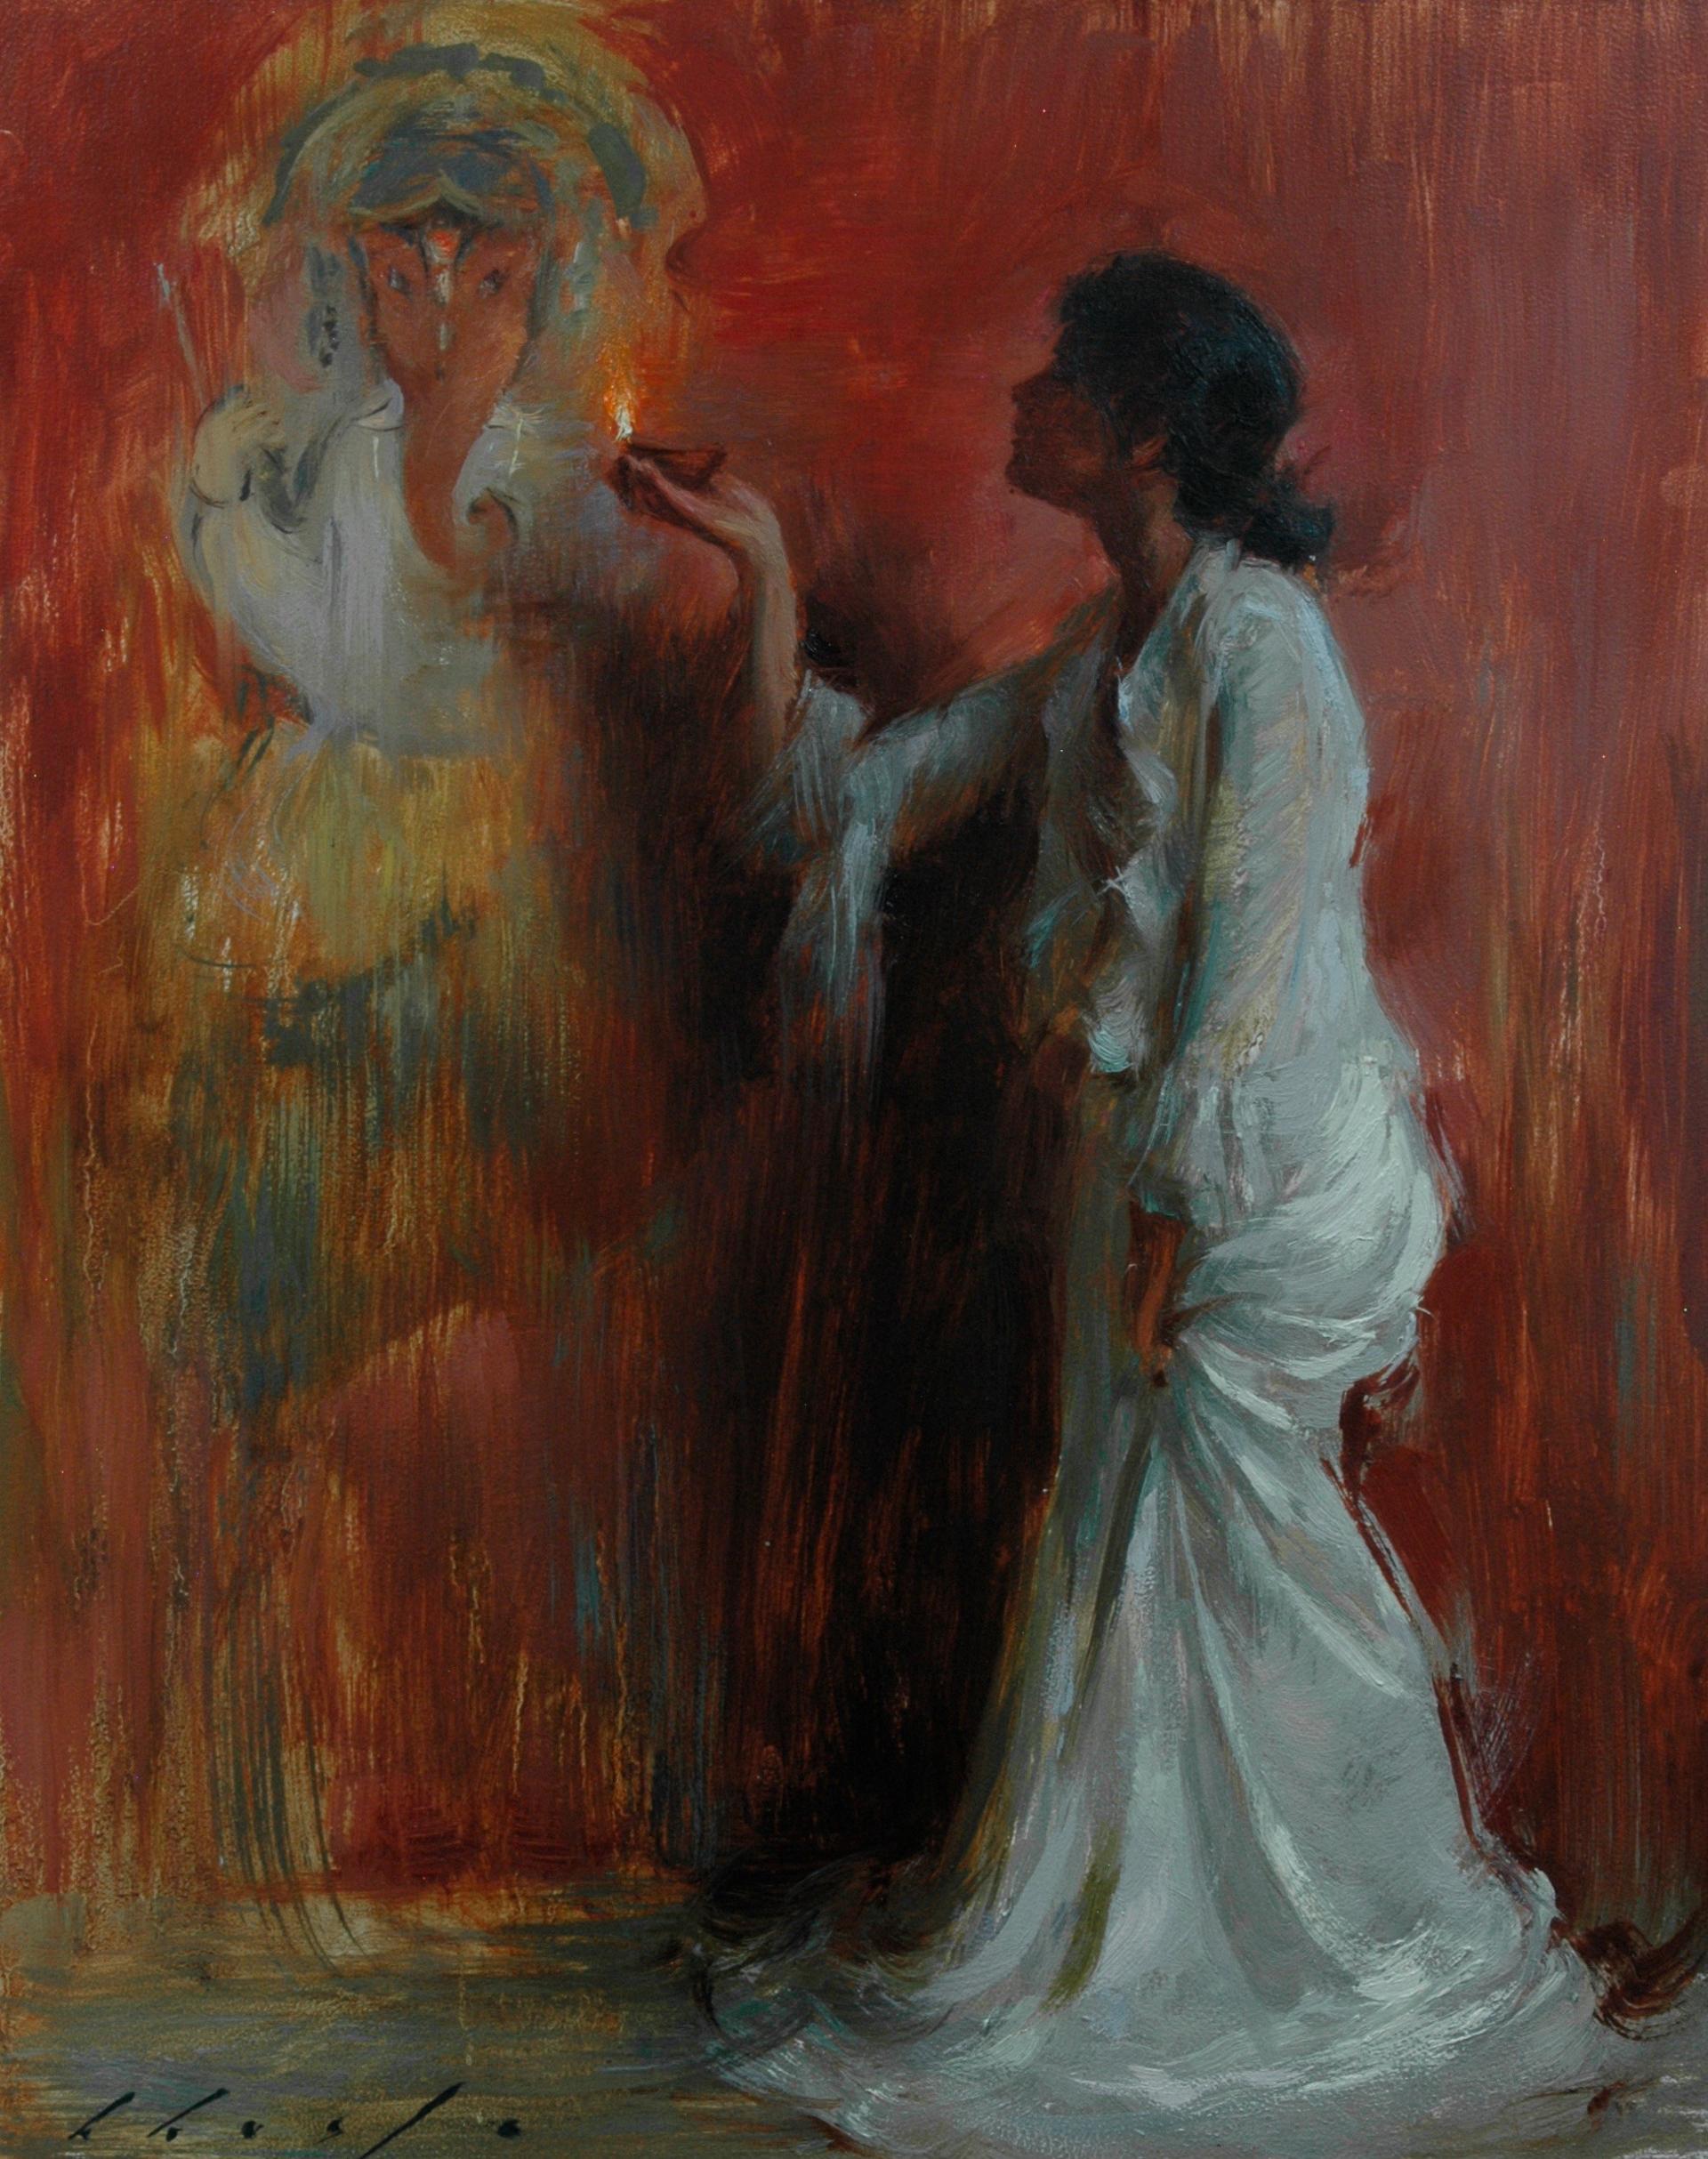 Offering by Suchitra Bhosle